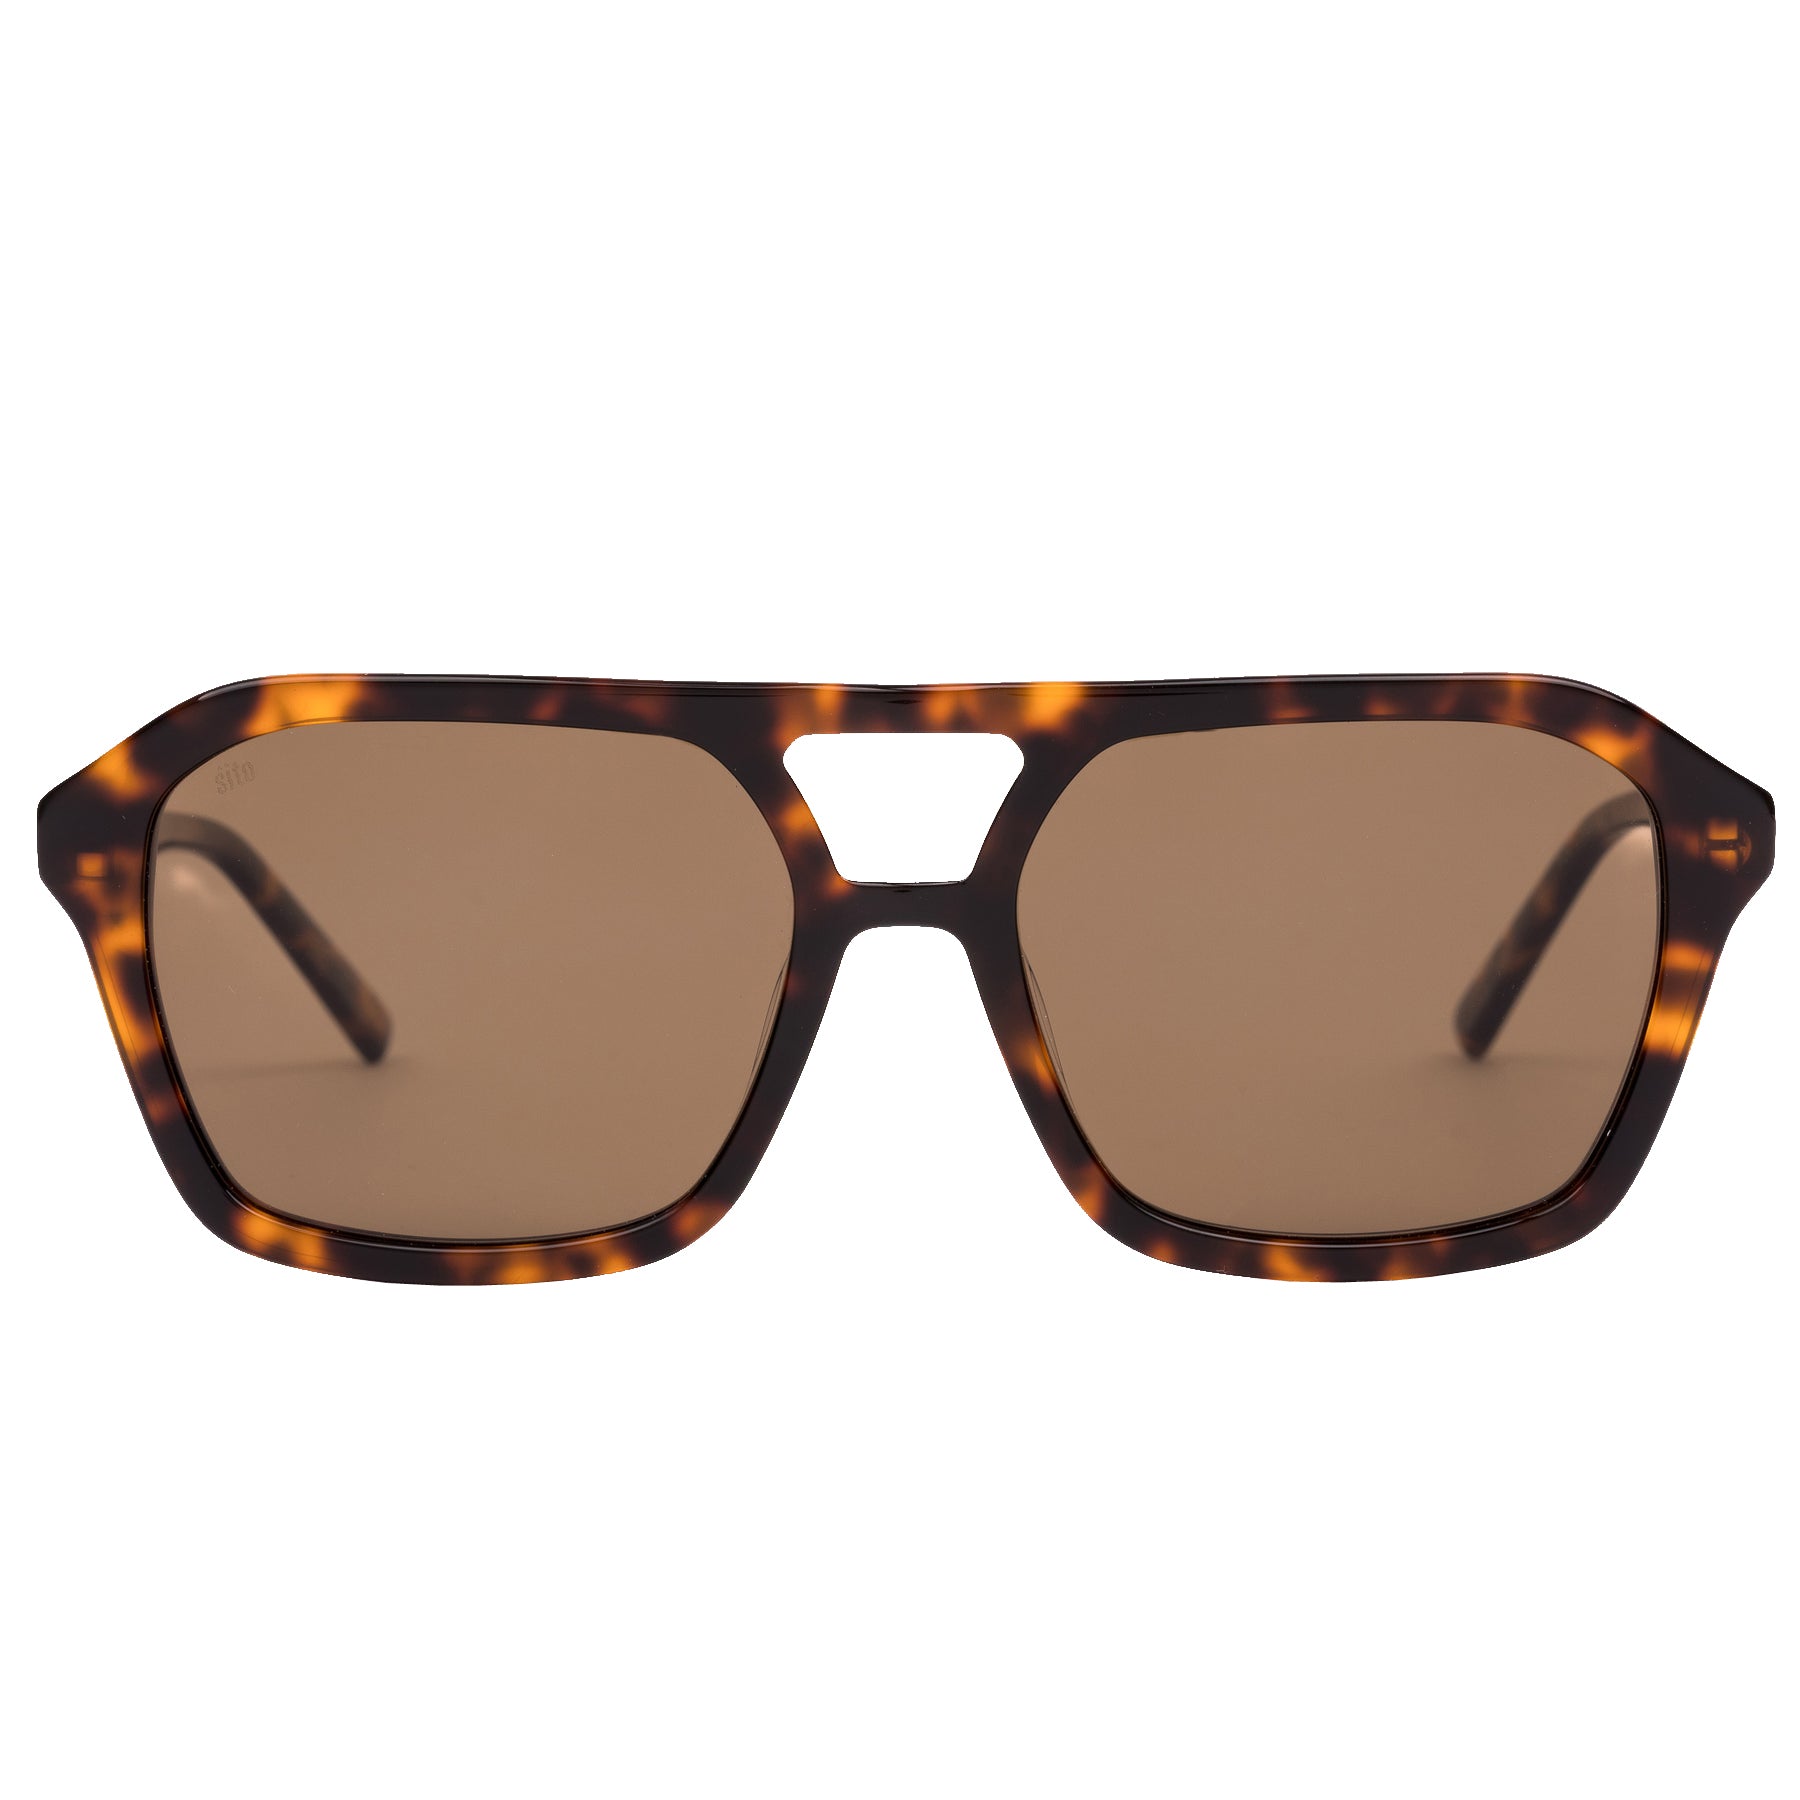 Sito The Void Polarized Sunglasses HoneyTort Brown